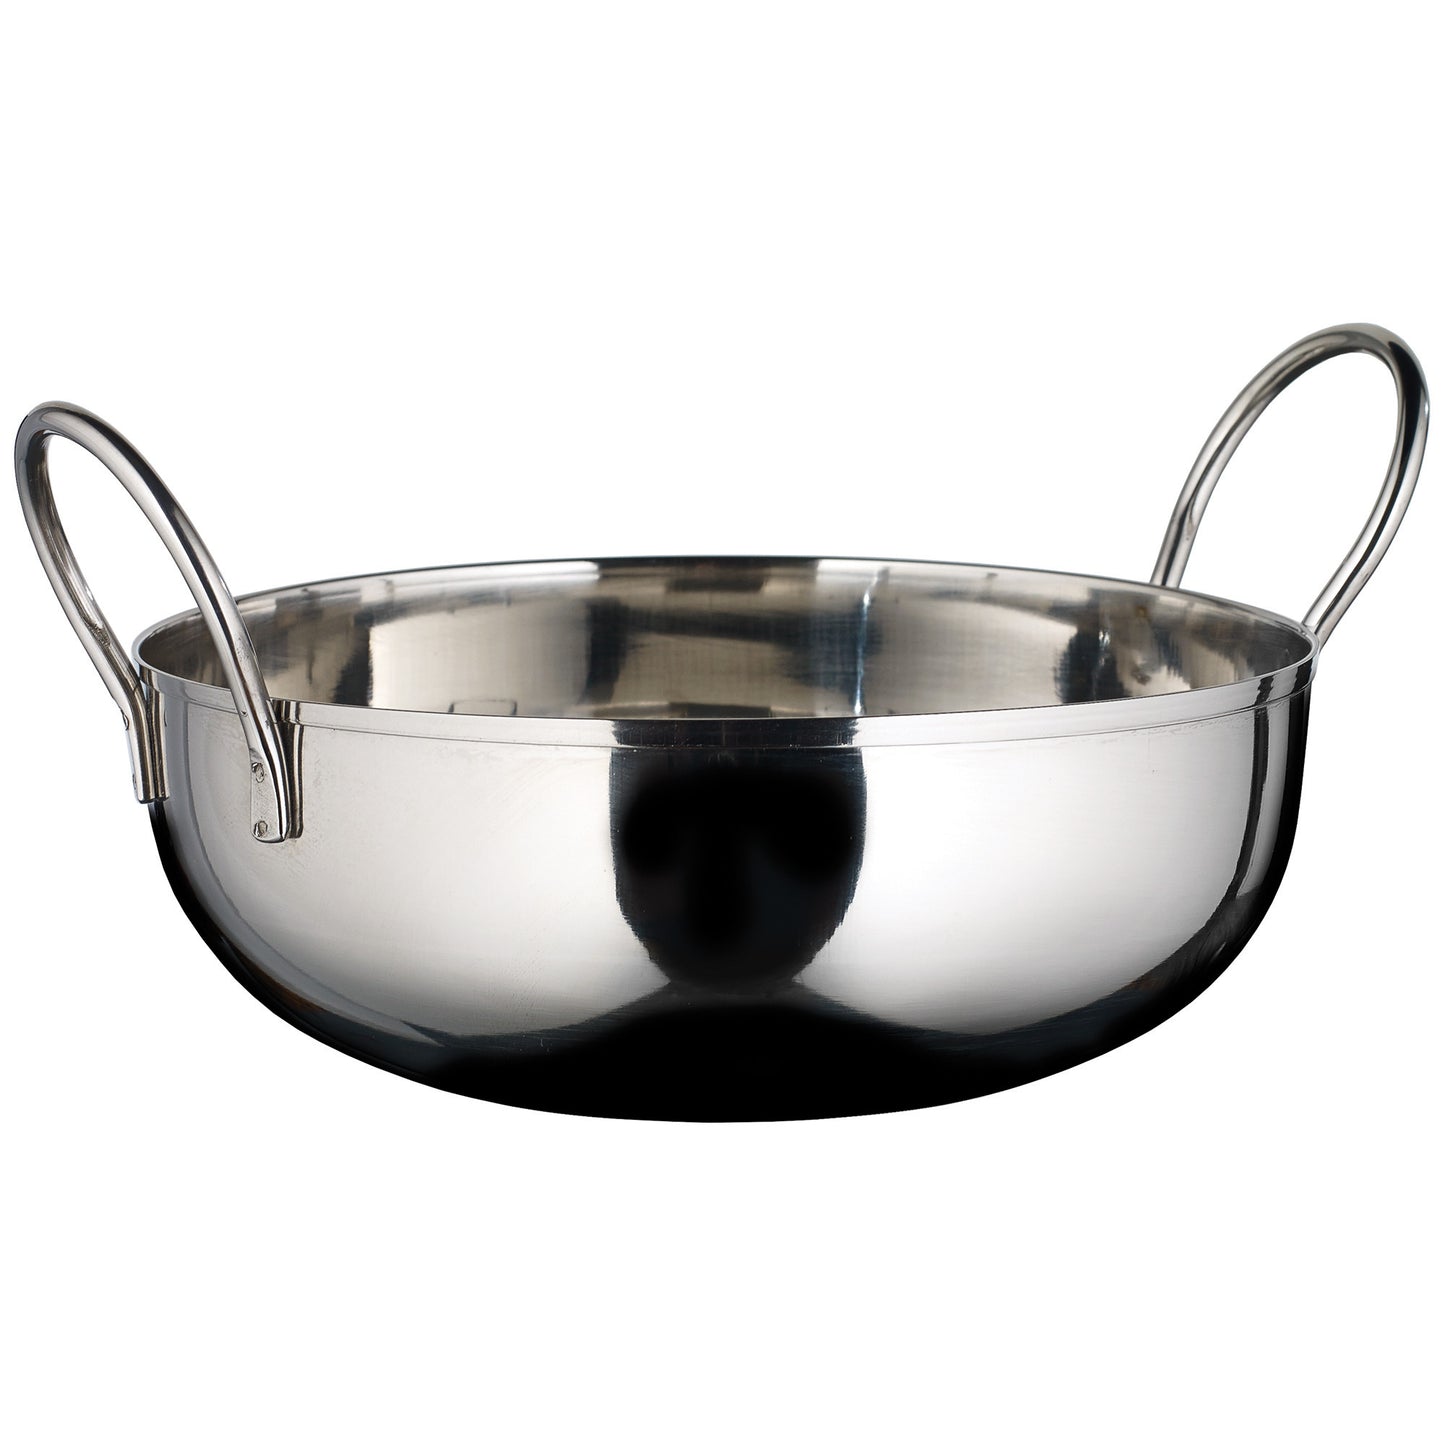 KDB-7 - Kady Bowl with Welded Handles, Stainless Steel, 1.5" H - 7"